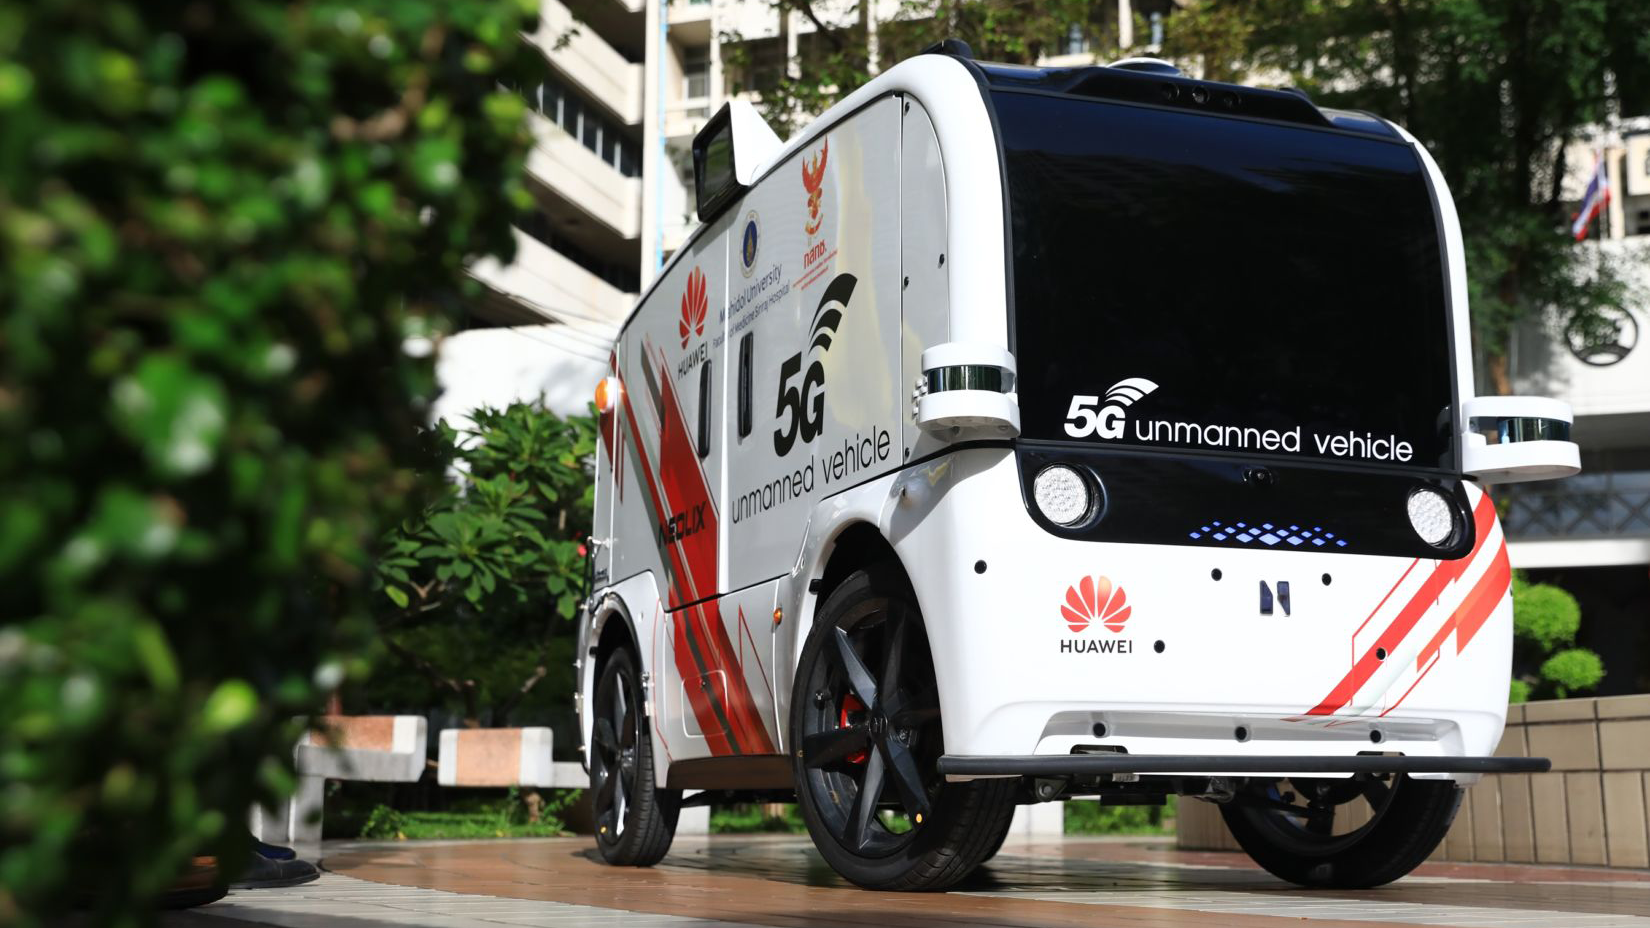 Huawei's driverless vehicle at a hospital in Thailand.